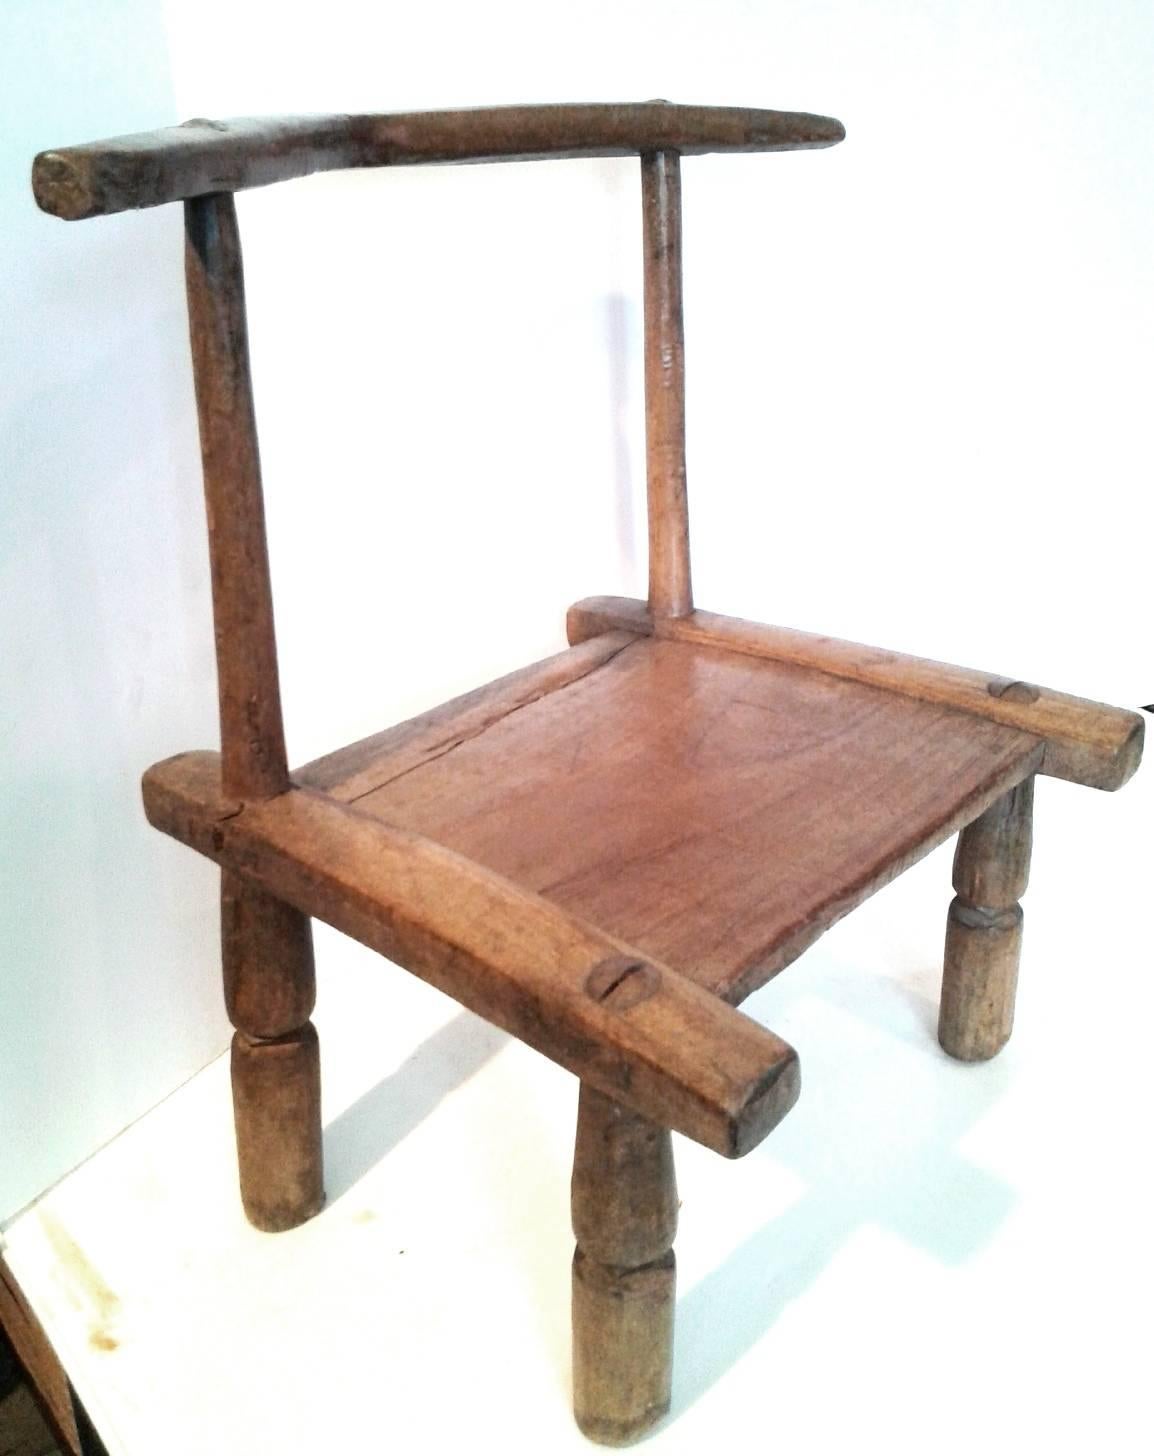 An original wooden Baule chair from ivory coast, hand carved and assembled. 

The chairs of the Djimini & Baule tribes of the Ivory Coast have a typical design, low with a vertical back. Traditionally reserved for members of the Poro (secret